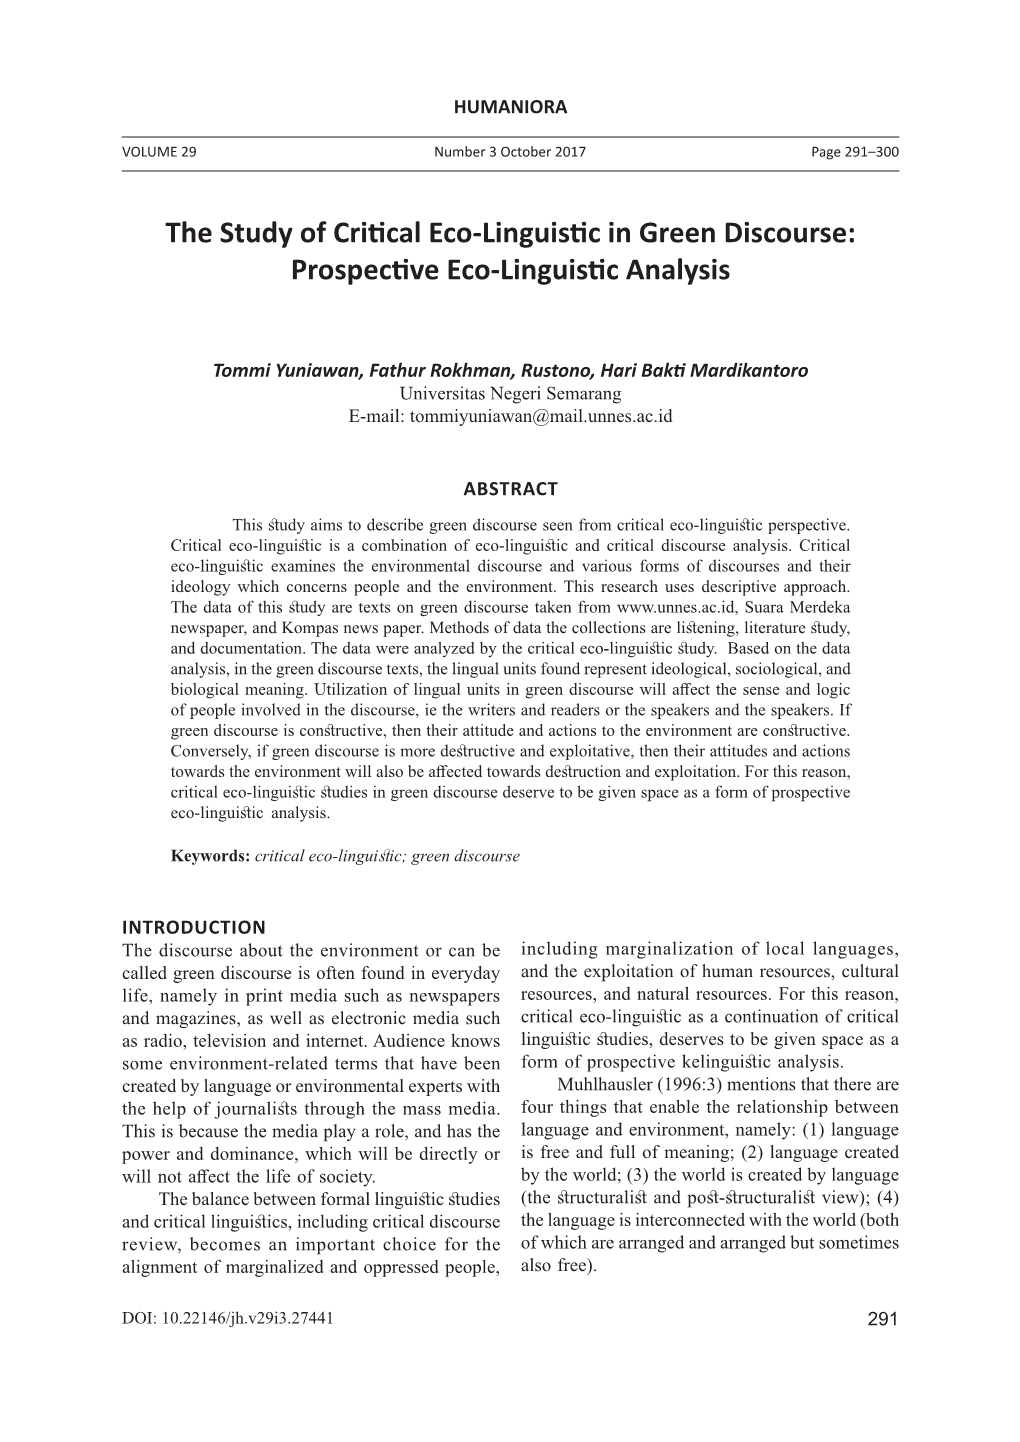 The Study of Critical Eco-Linguistic in Green Discourse: Prospective Eco-Linguistic Analysis